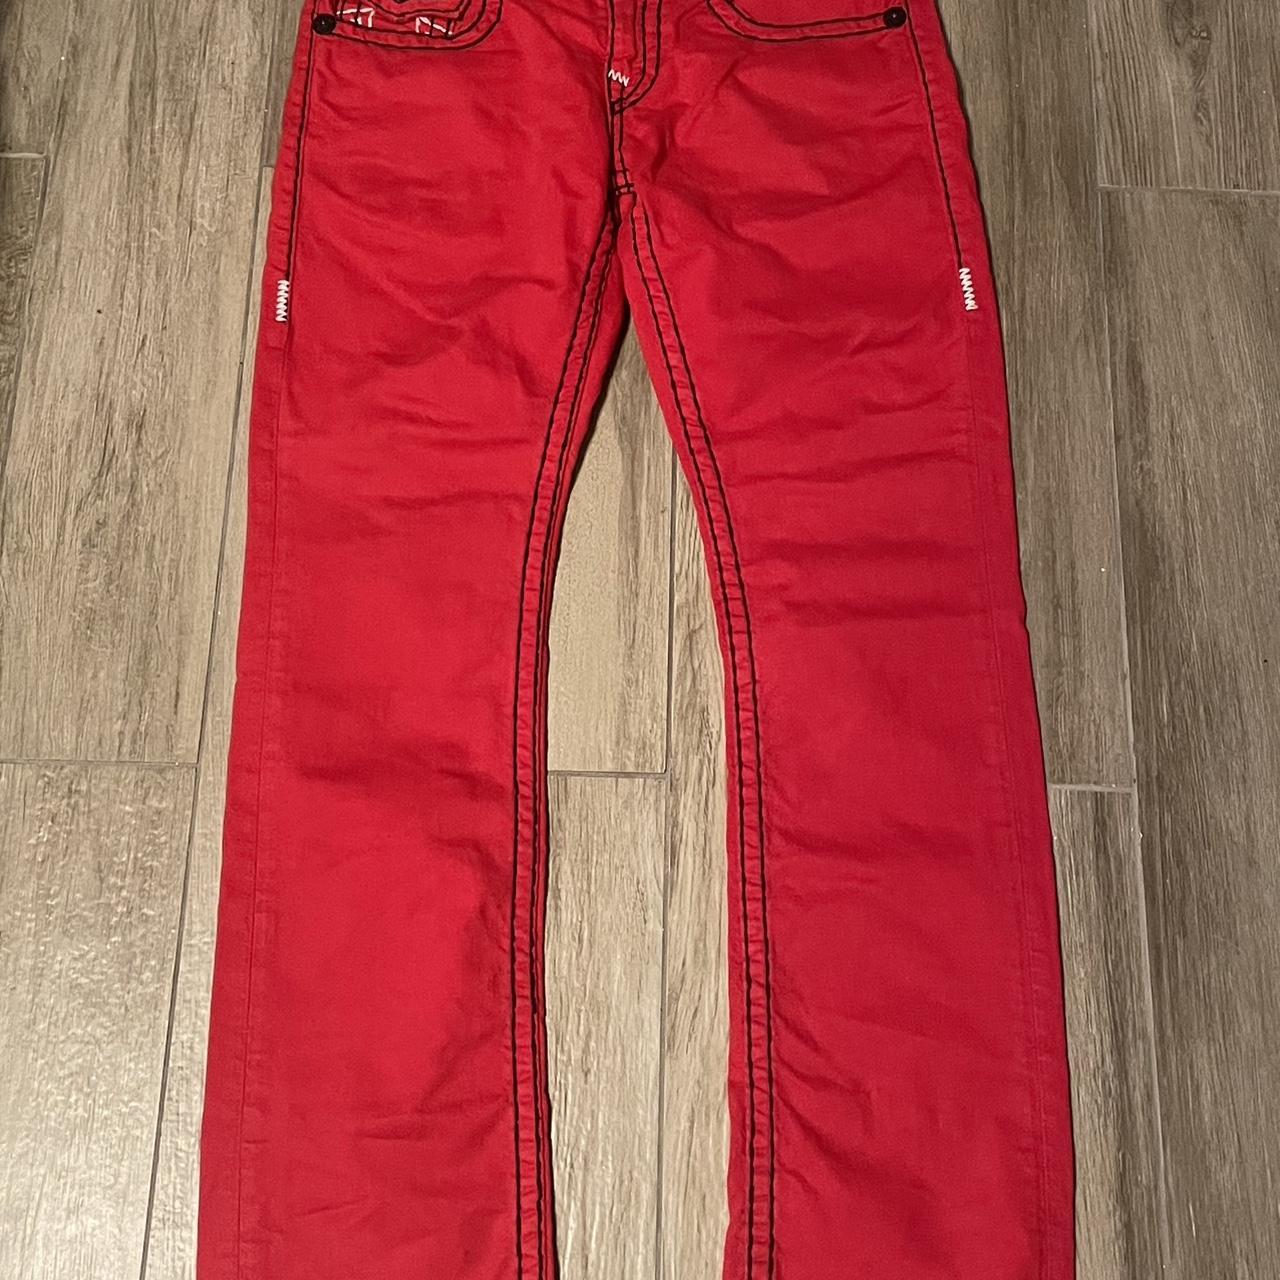 size 30 red trueys black and white stitching little... - Depop